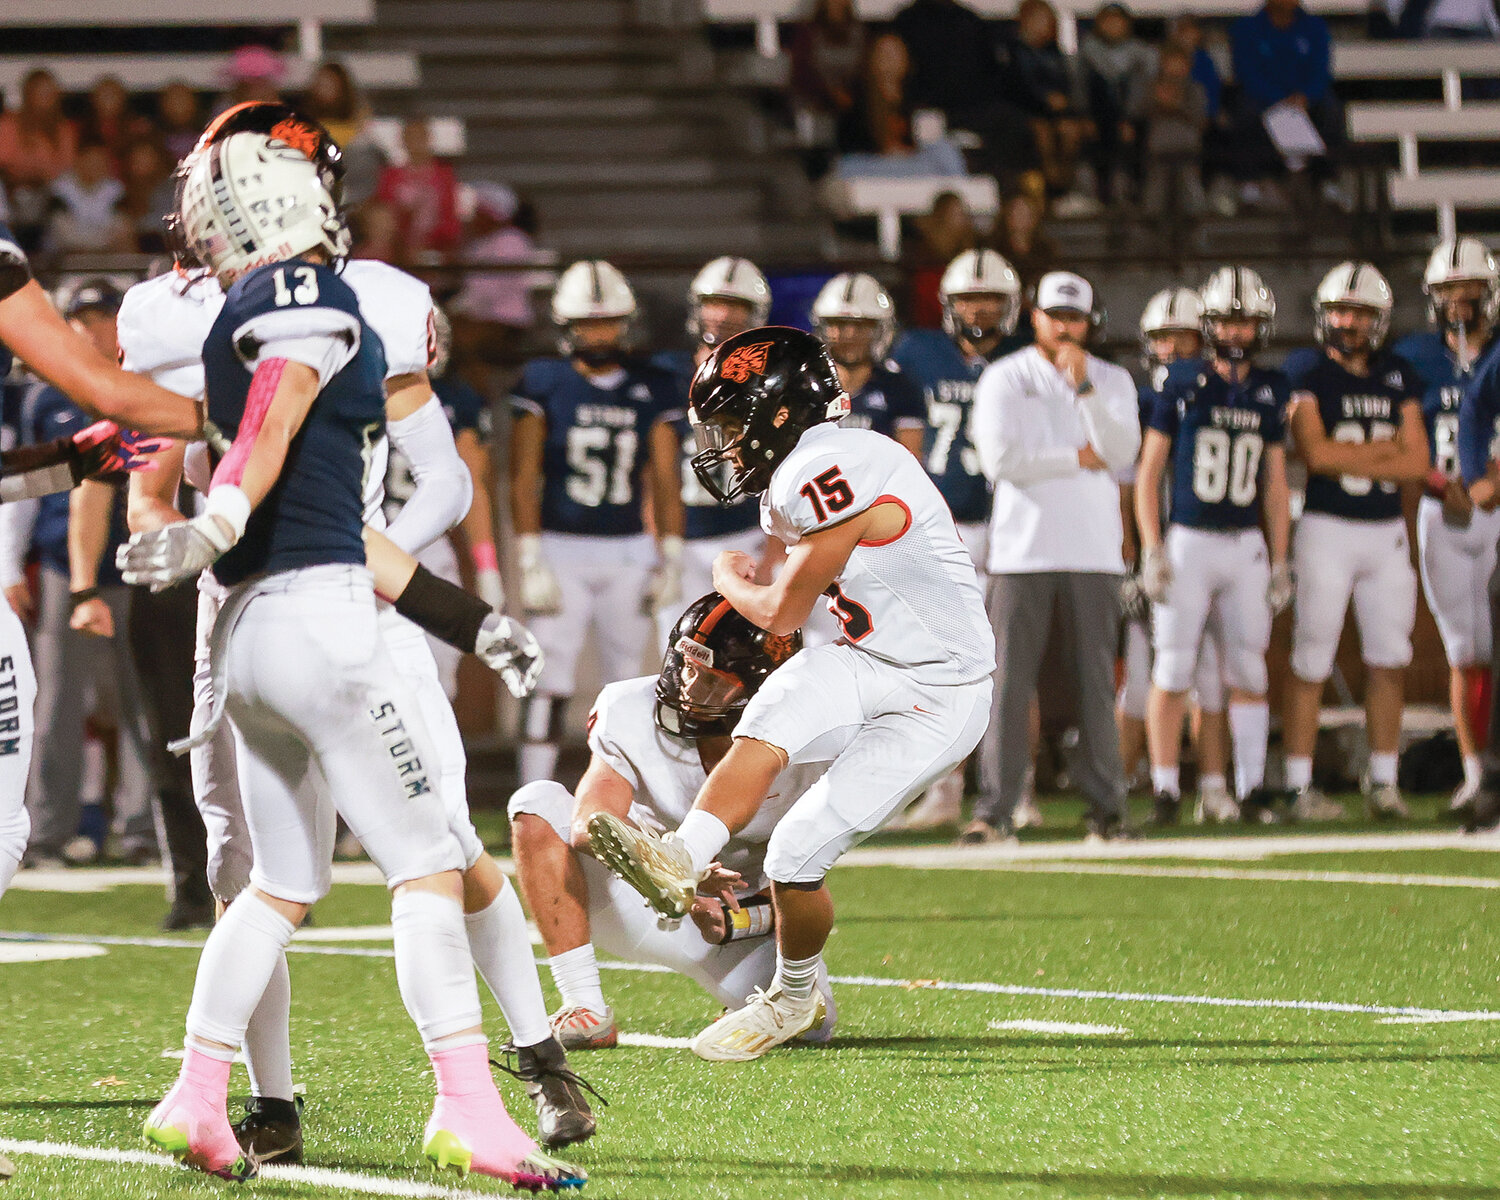 Battle Ground’s Bryland Fick kicks a 38-yard field goal to make the game 14-10 in the second quarter, but the Skyview Storm finished the game 49-10 for the Tigers’ first loss of the season.